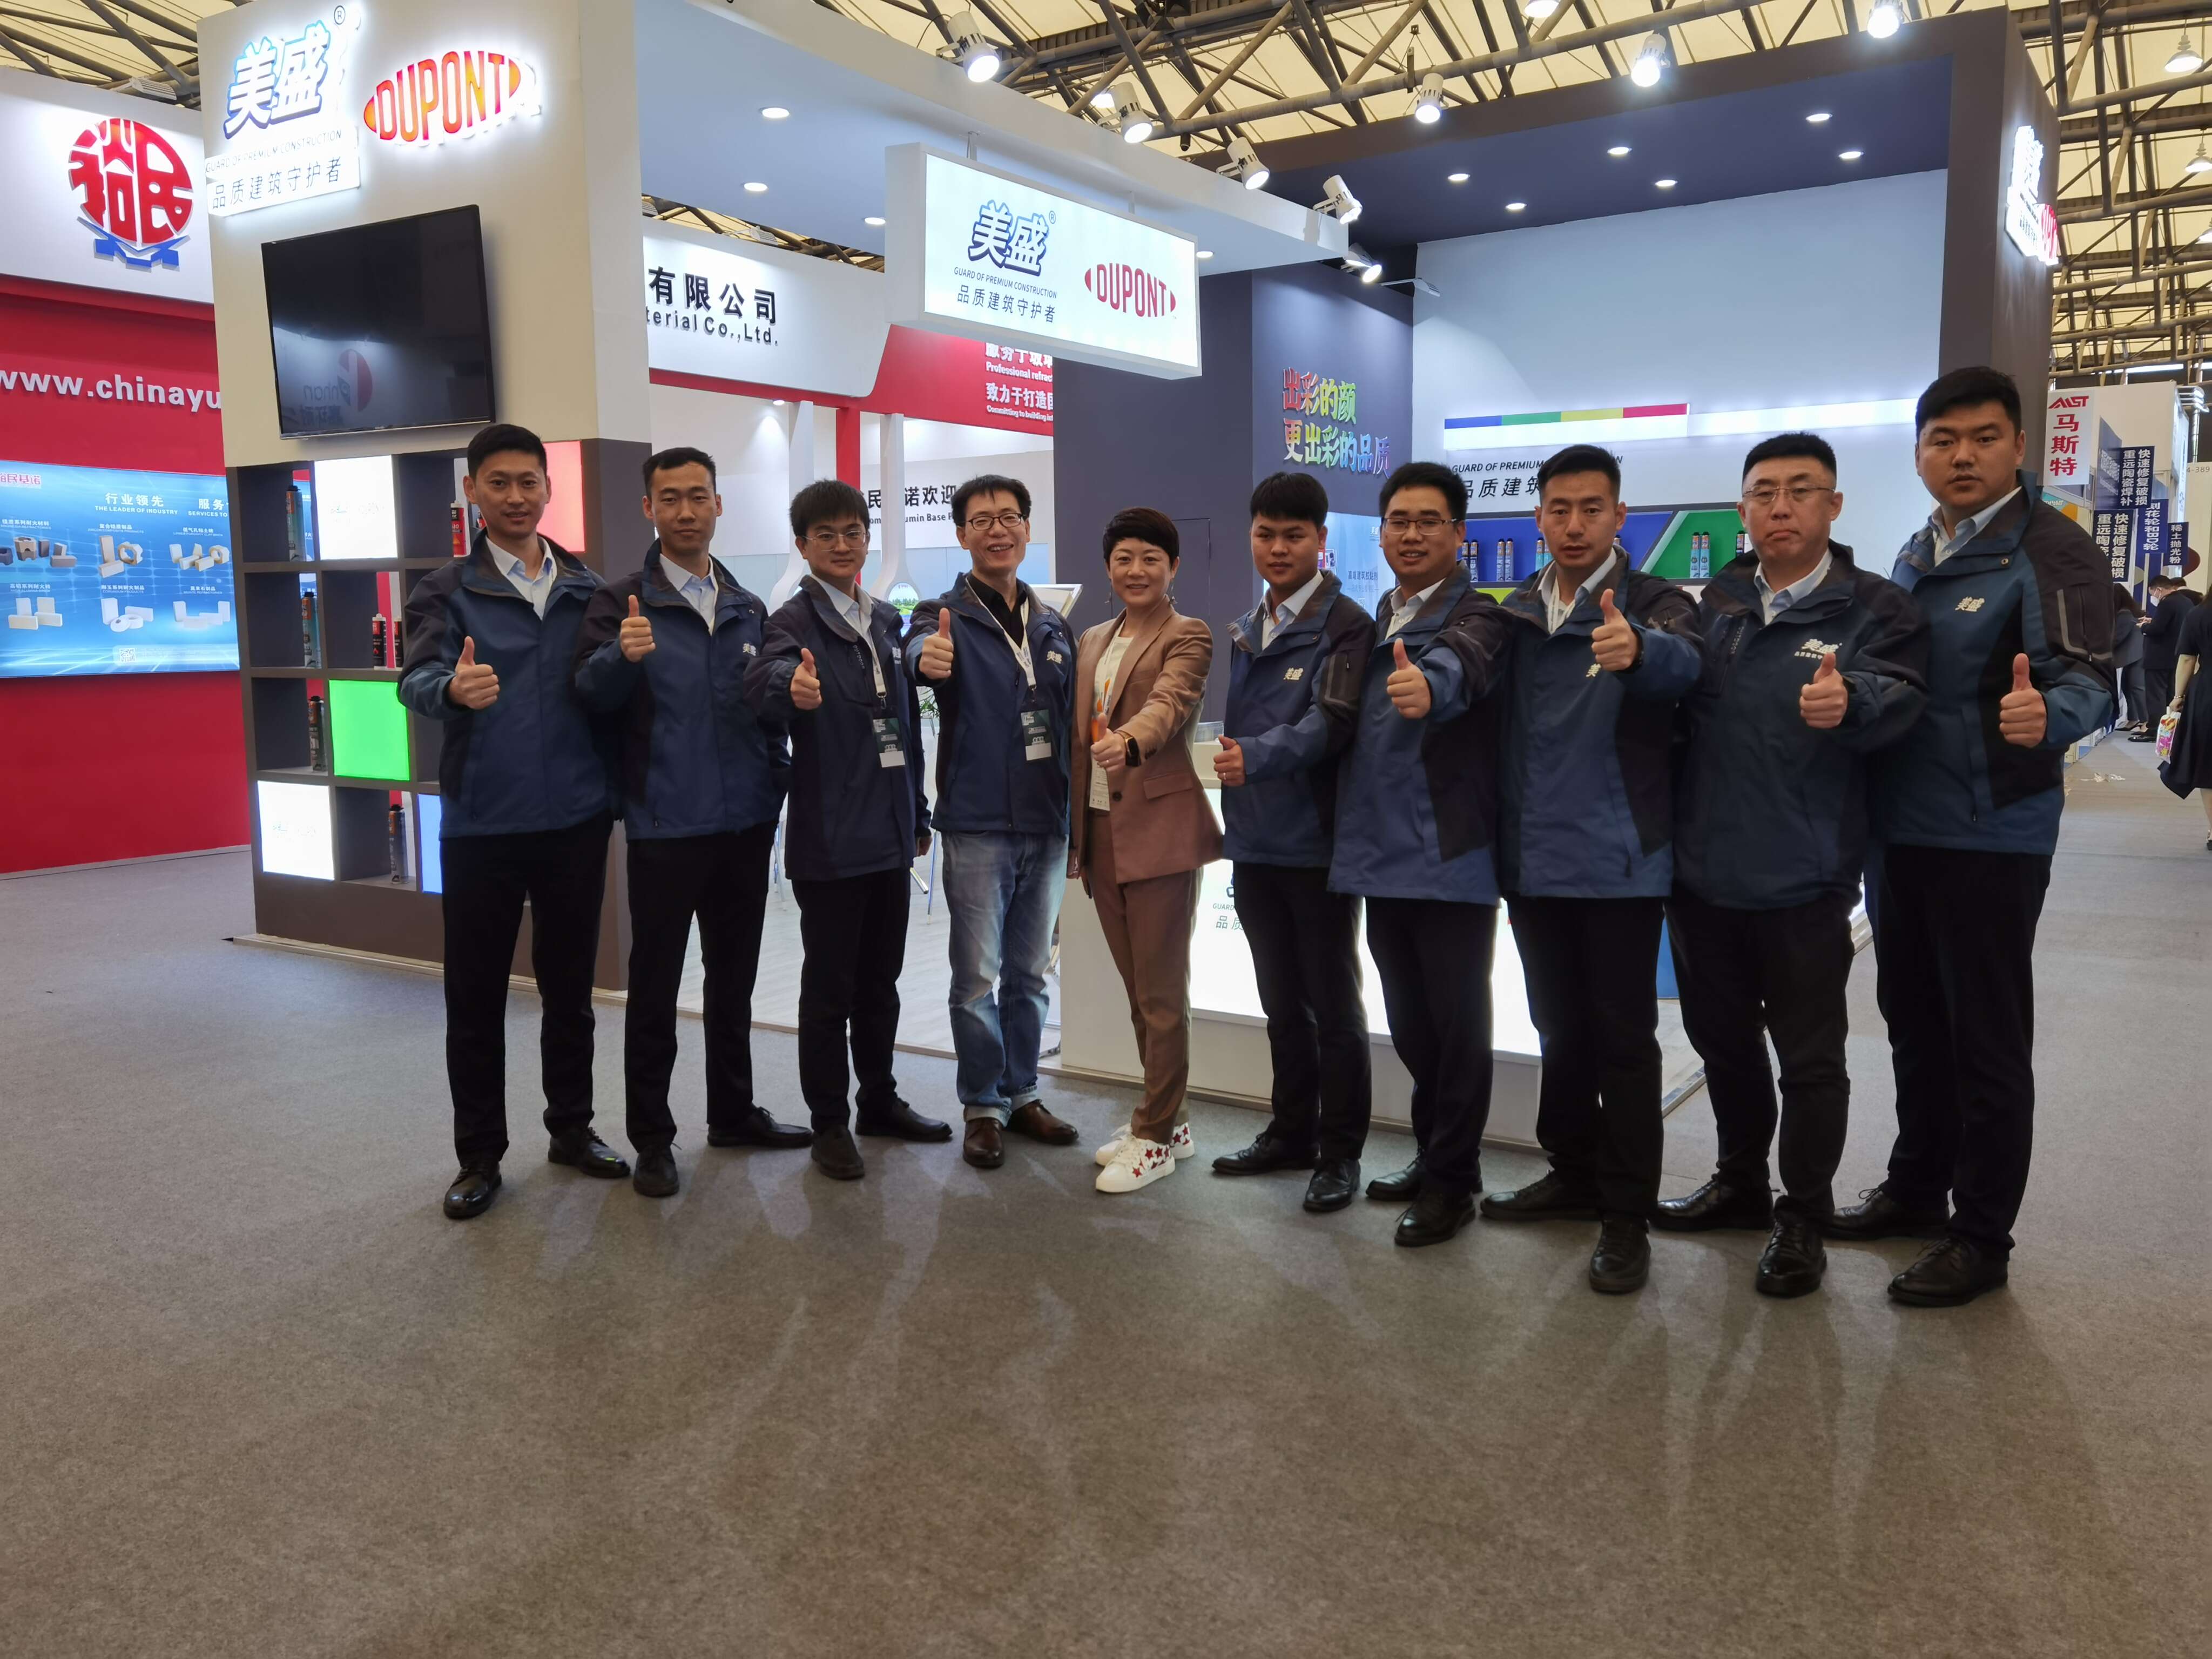 THE 31ST INTERNATIONAL GLASS INDUSTRY TECHNOLOGY EXHIBITION IN CHINA